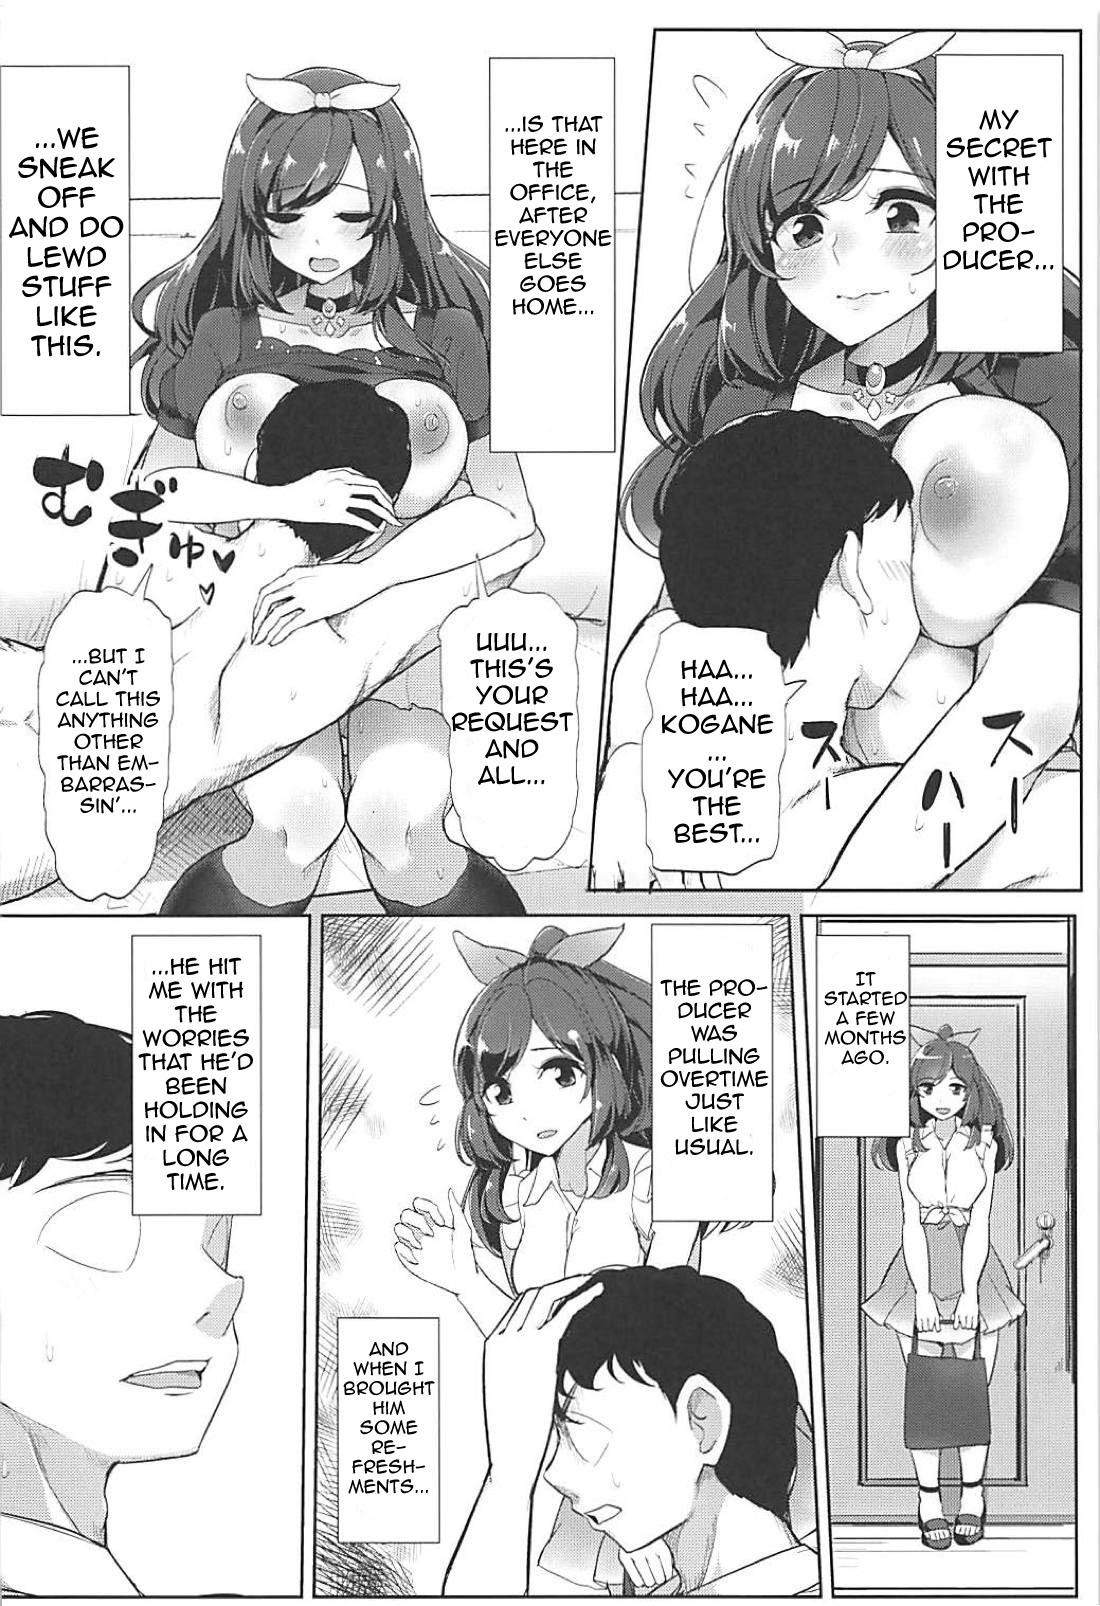 Groupfuck P e no Suki wa Tomeraren bai - When I Just Can't Stop Loving The Producer - The idolmaster One - Page 5